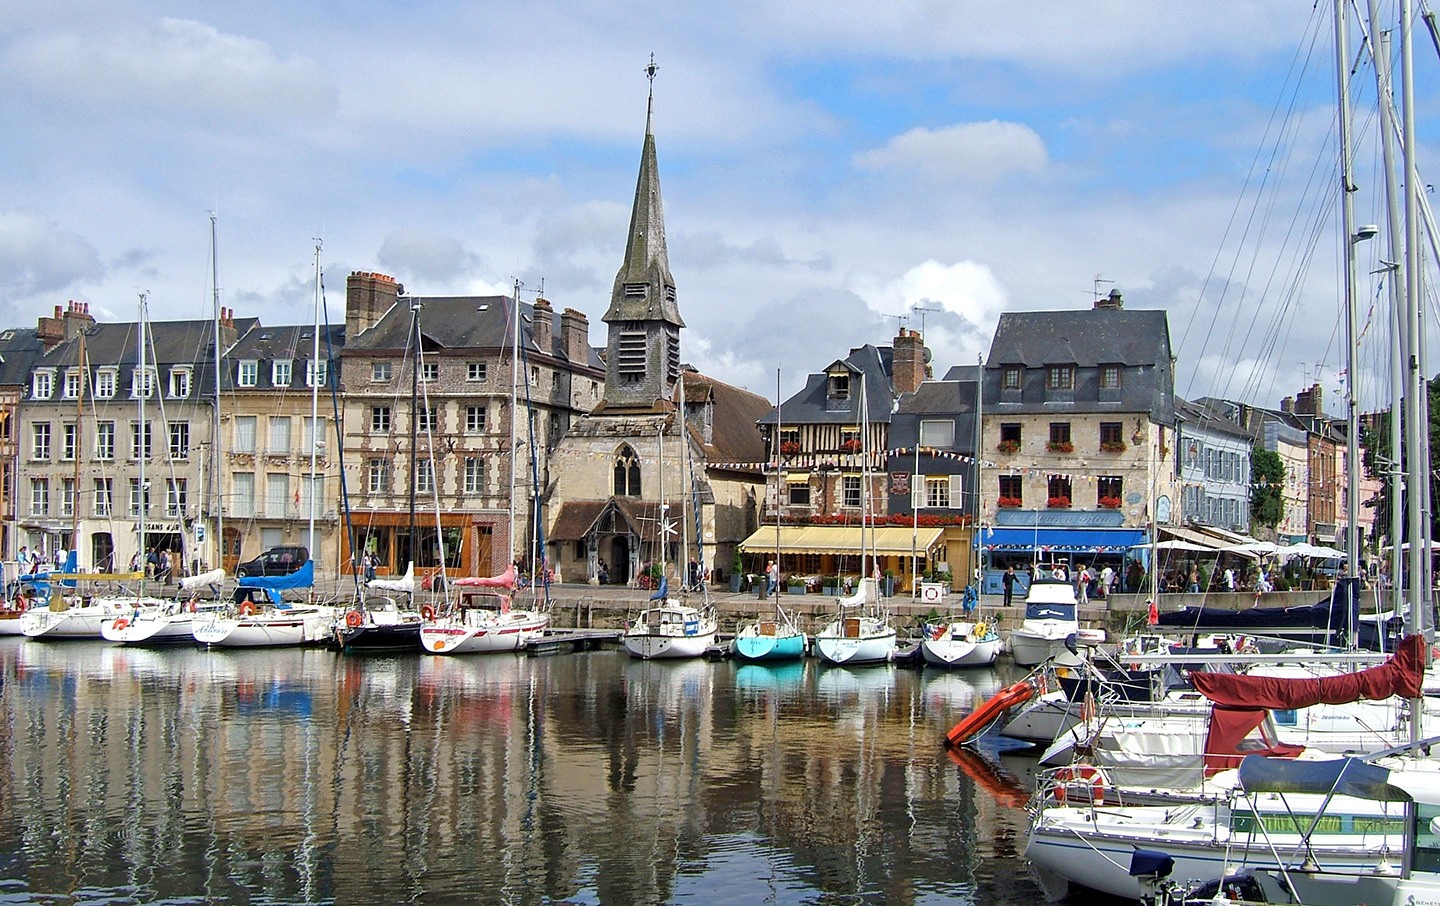 The Vieux Bassin harbour in Honfleur in Normandy, France